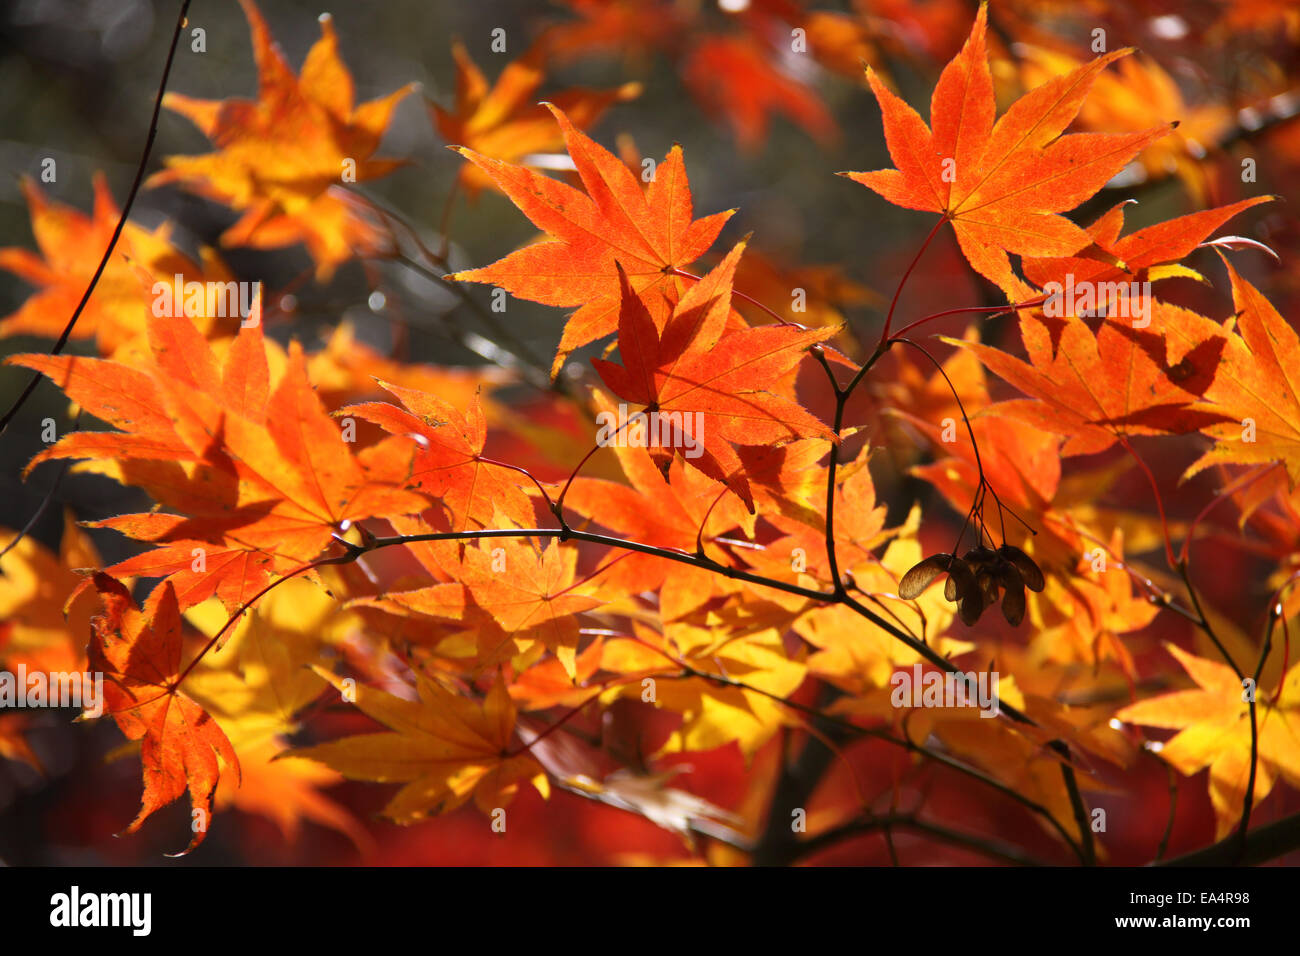 Fall yellow and orange maple leaves Stock Photo